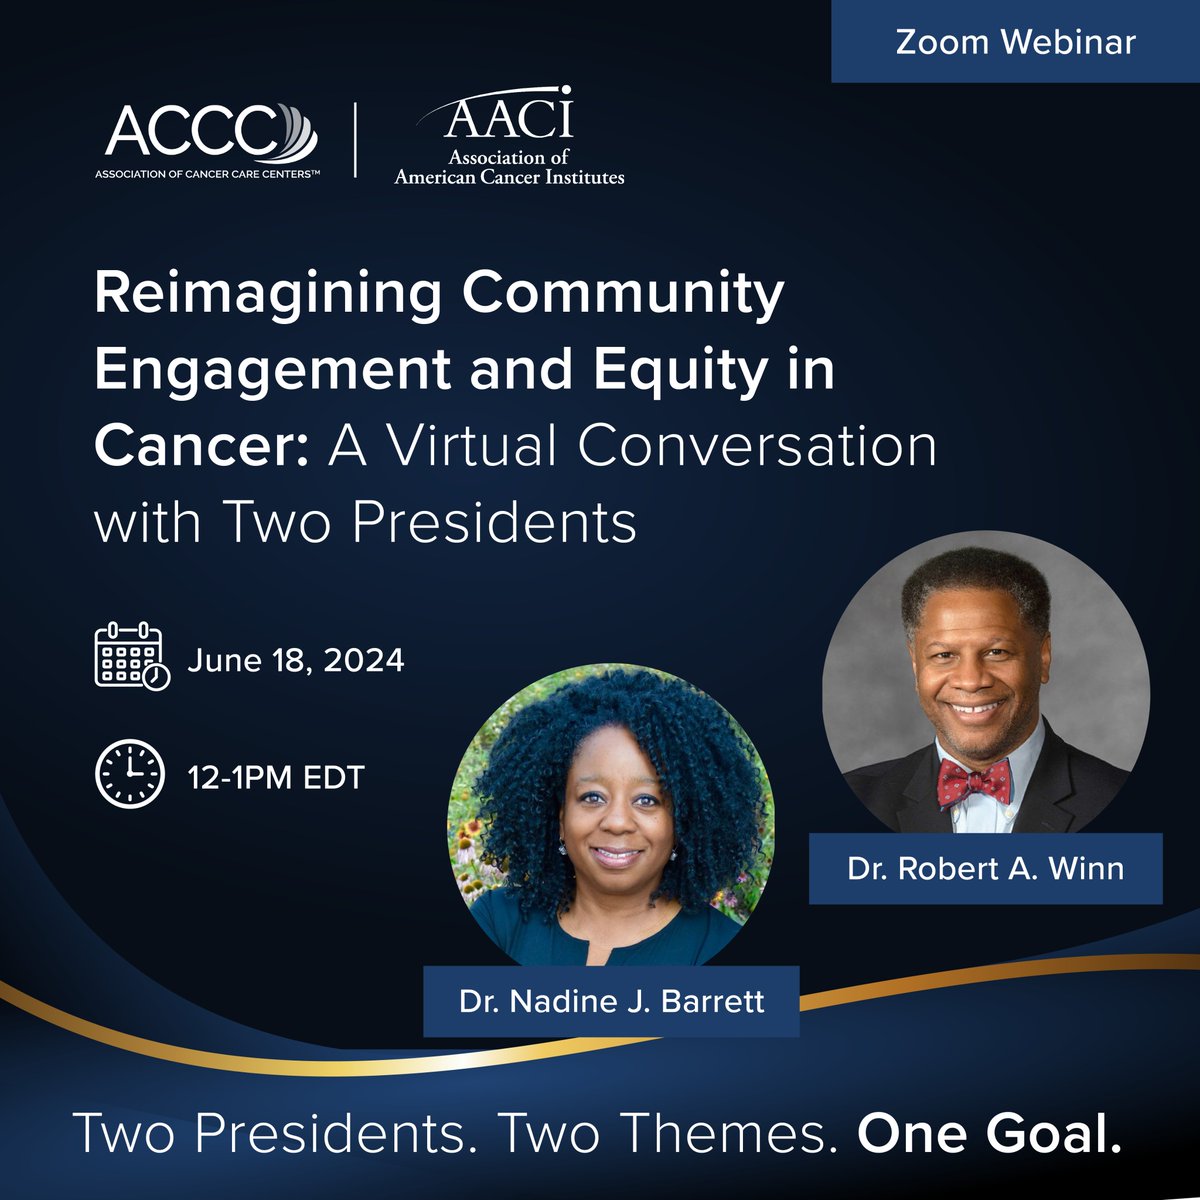 On June 18 at 12:00 pm ET, in advance of #Juneteenth, join @ACCCBuzz President @DrNJBarrett and @AACI_President @DrRobWinn for an empowering discussion about a shared organizational goal to advance #HealthEquity in #CancerCare. Register now: bit.ly/4bwjbKA. #webinar